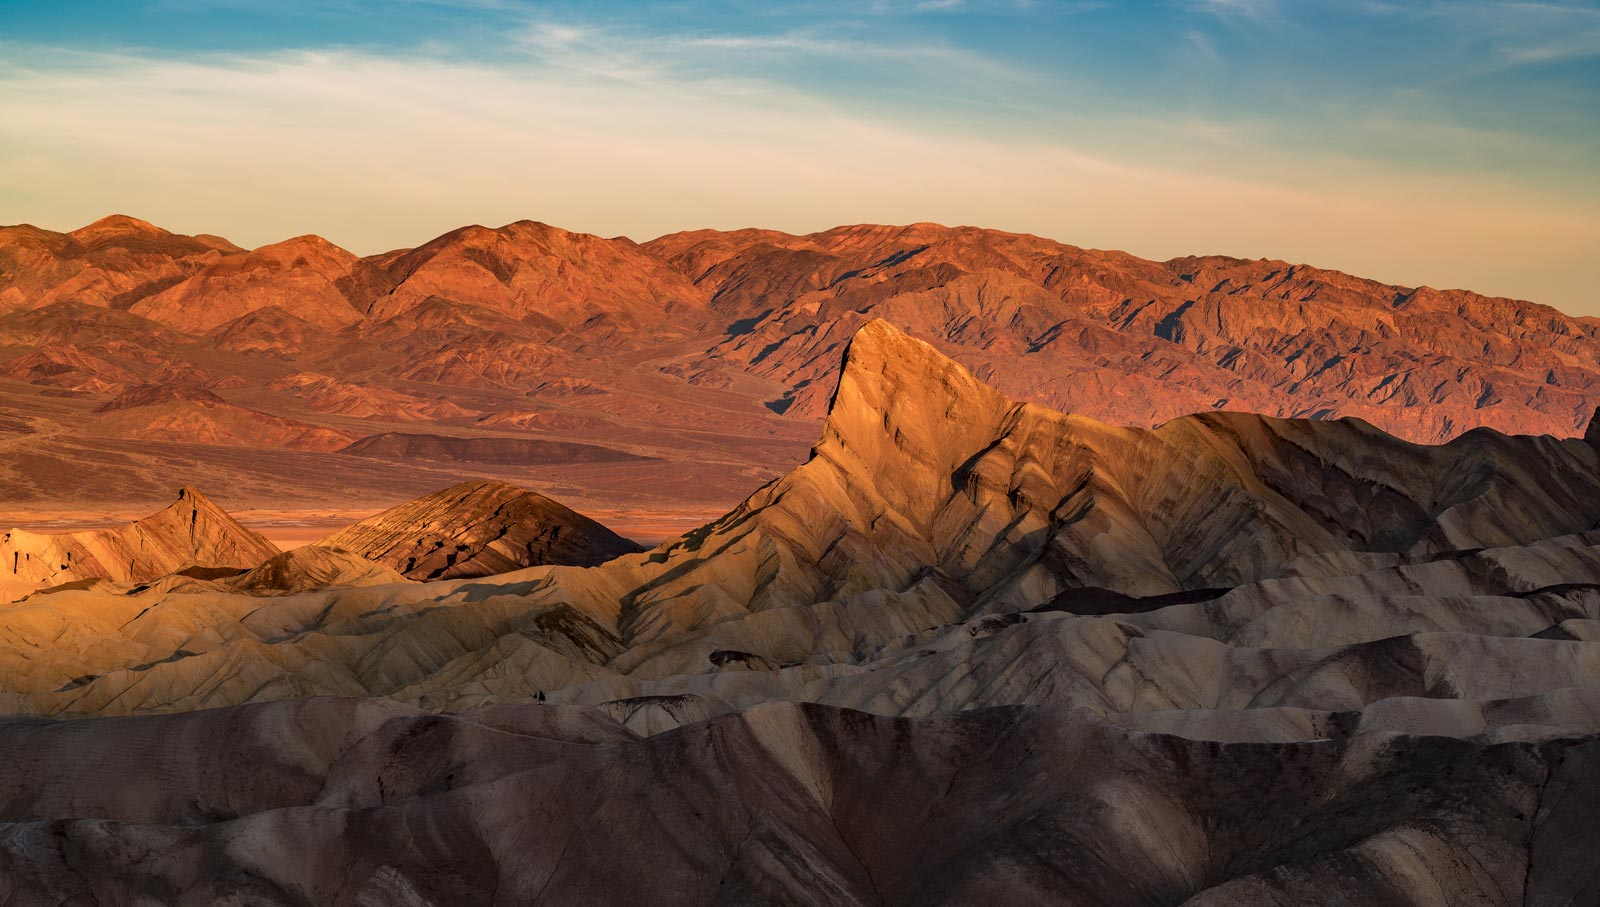 ZABRISKIE POINT: How to See Death Valley’s Most Visited Spot (+Video)